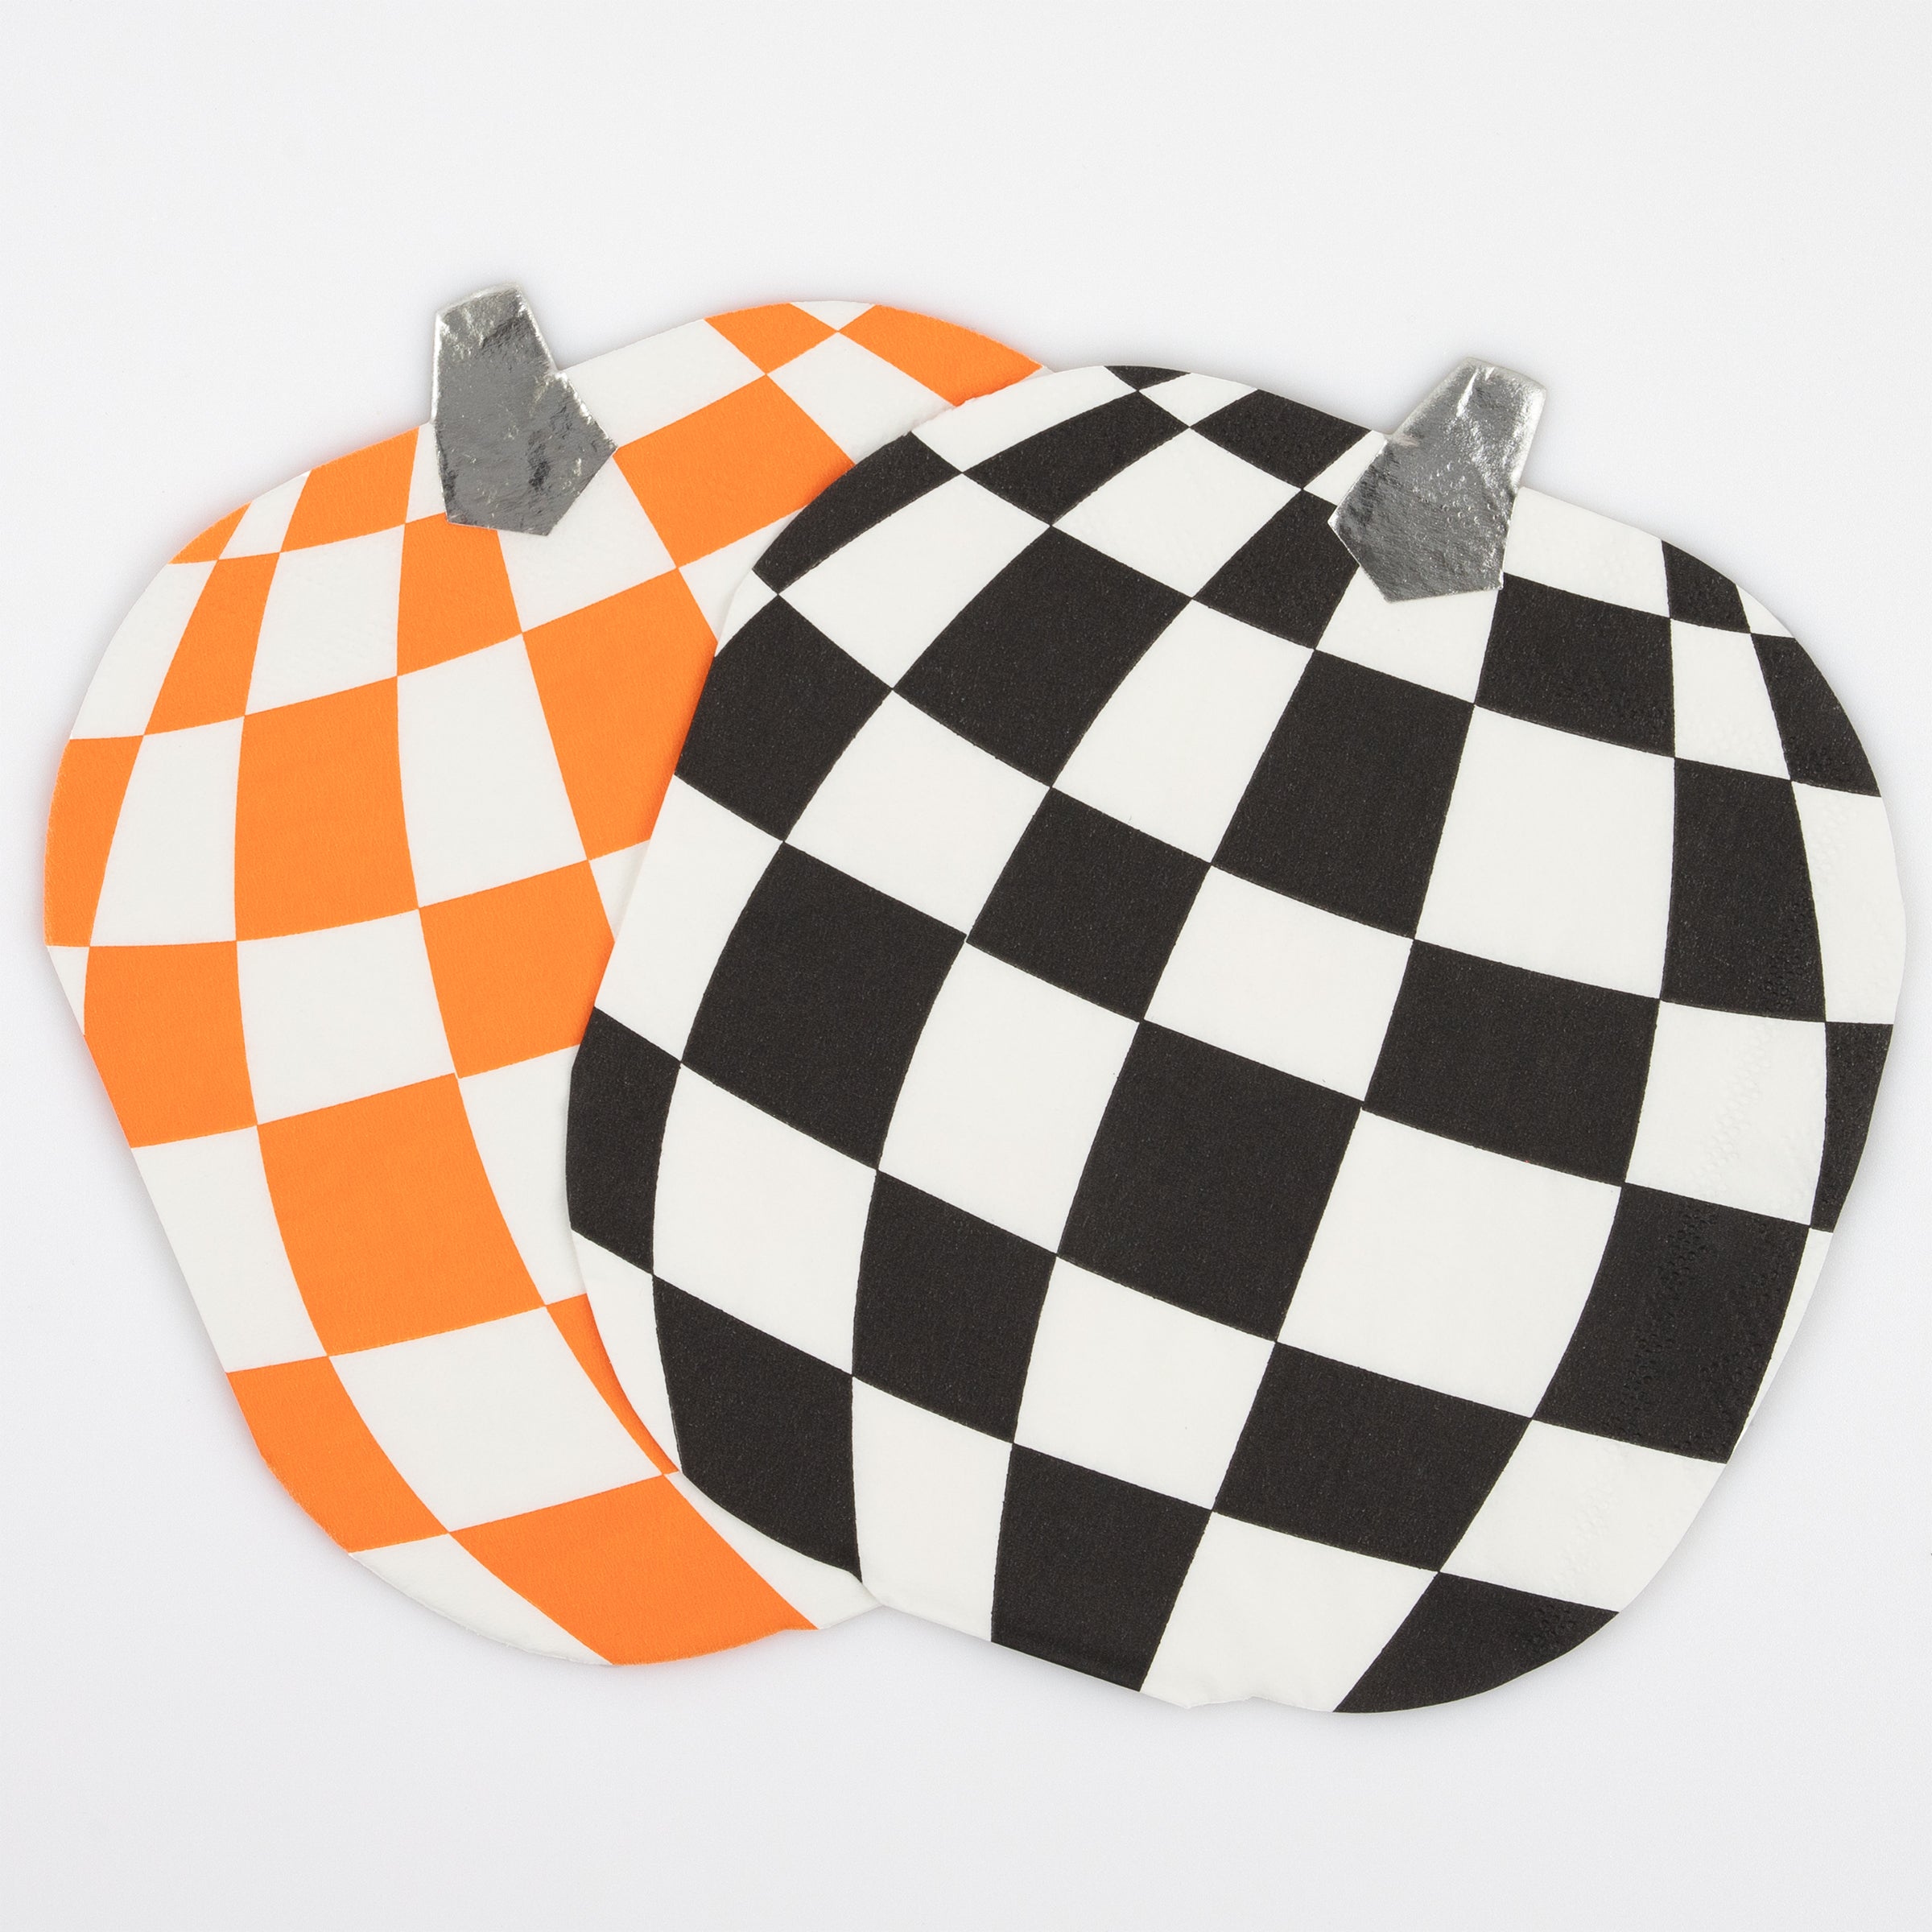 Our Halloween napkins, party napkins with retro designs, are perfect if you want Halloween party decoration ideas.